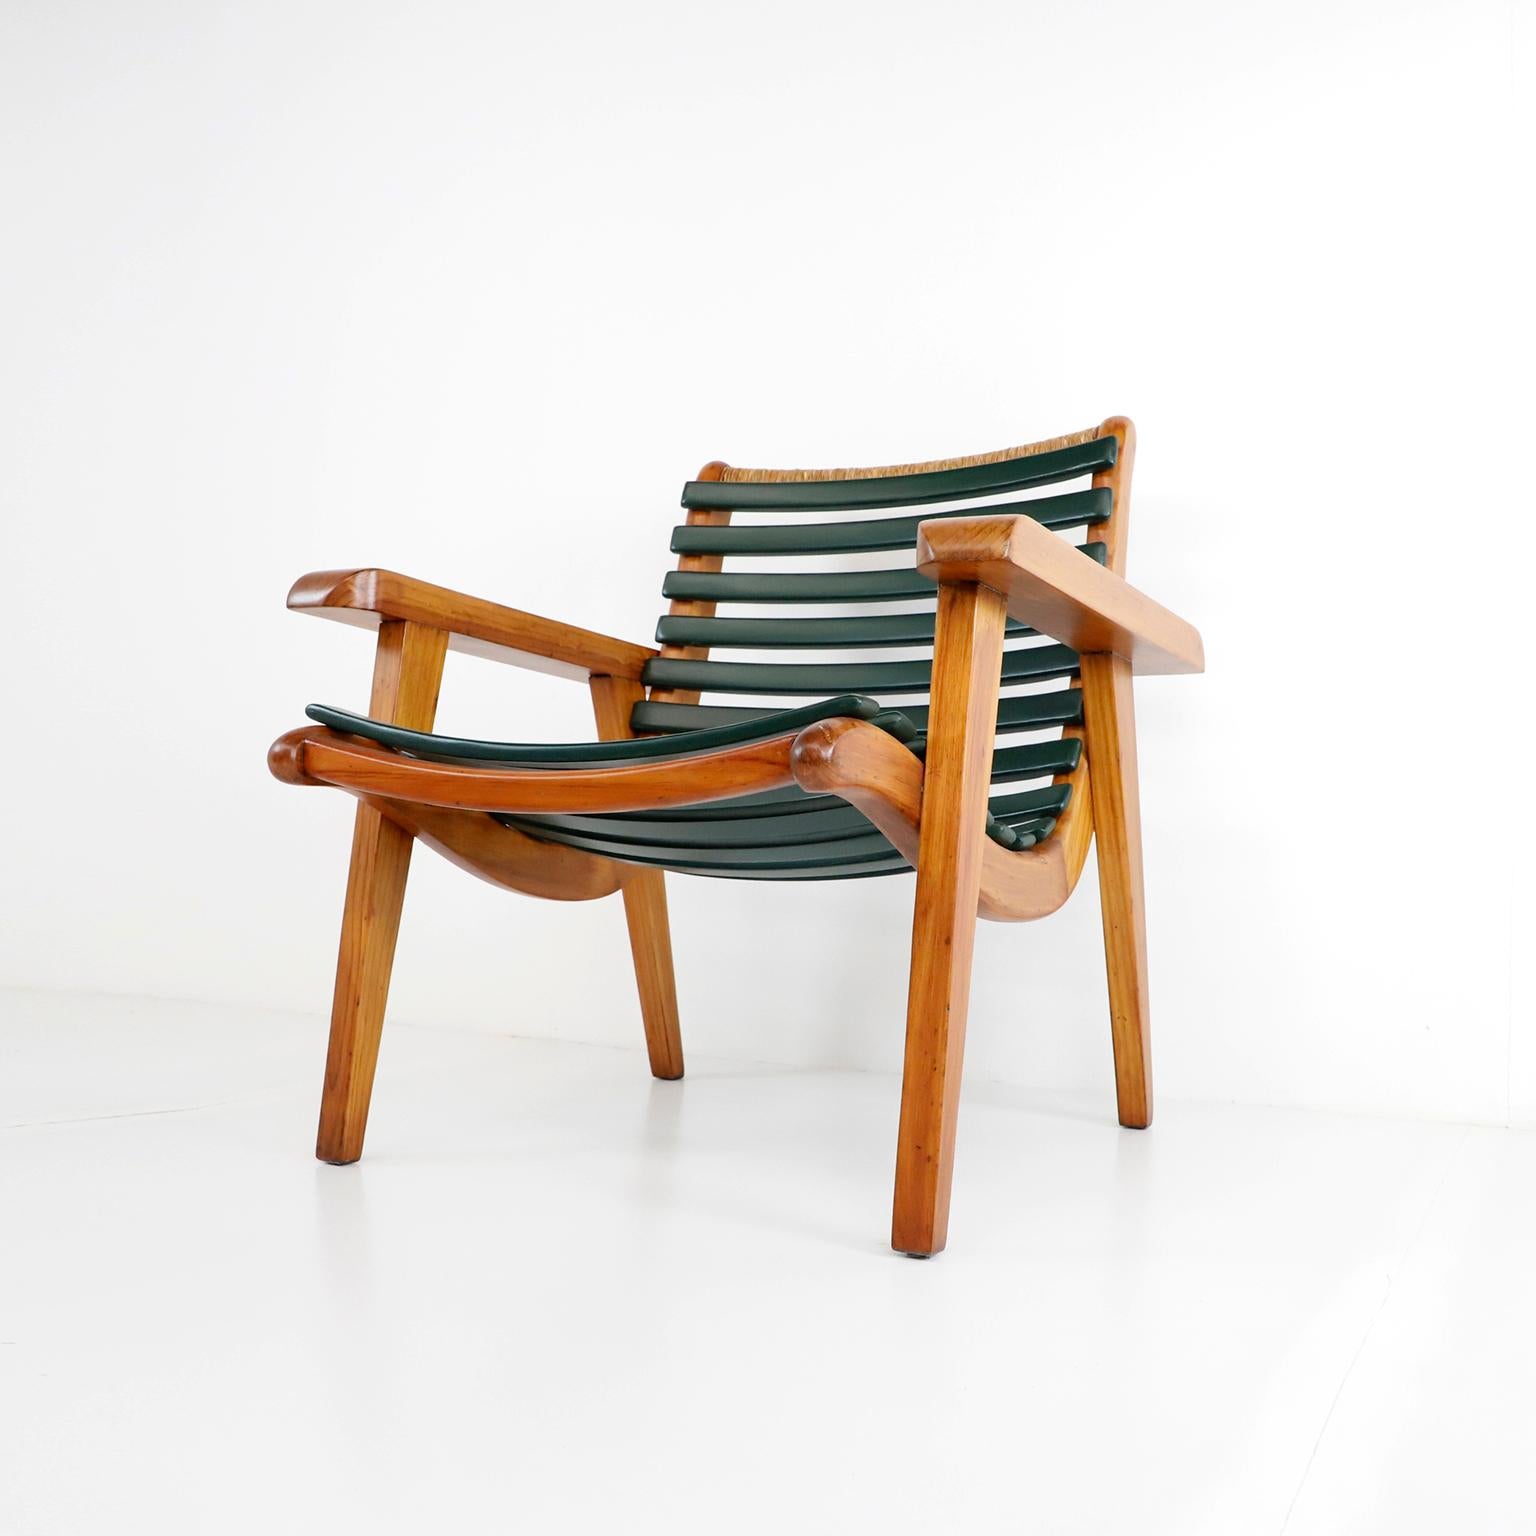 We offer this Mexican San Miguelito chair attributed to Michael Van Beuren, circa 1950 in primavera wood.